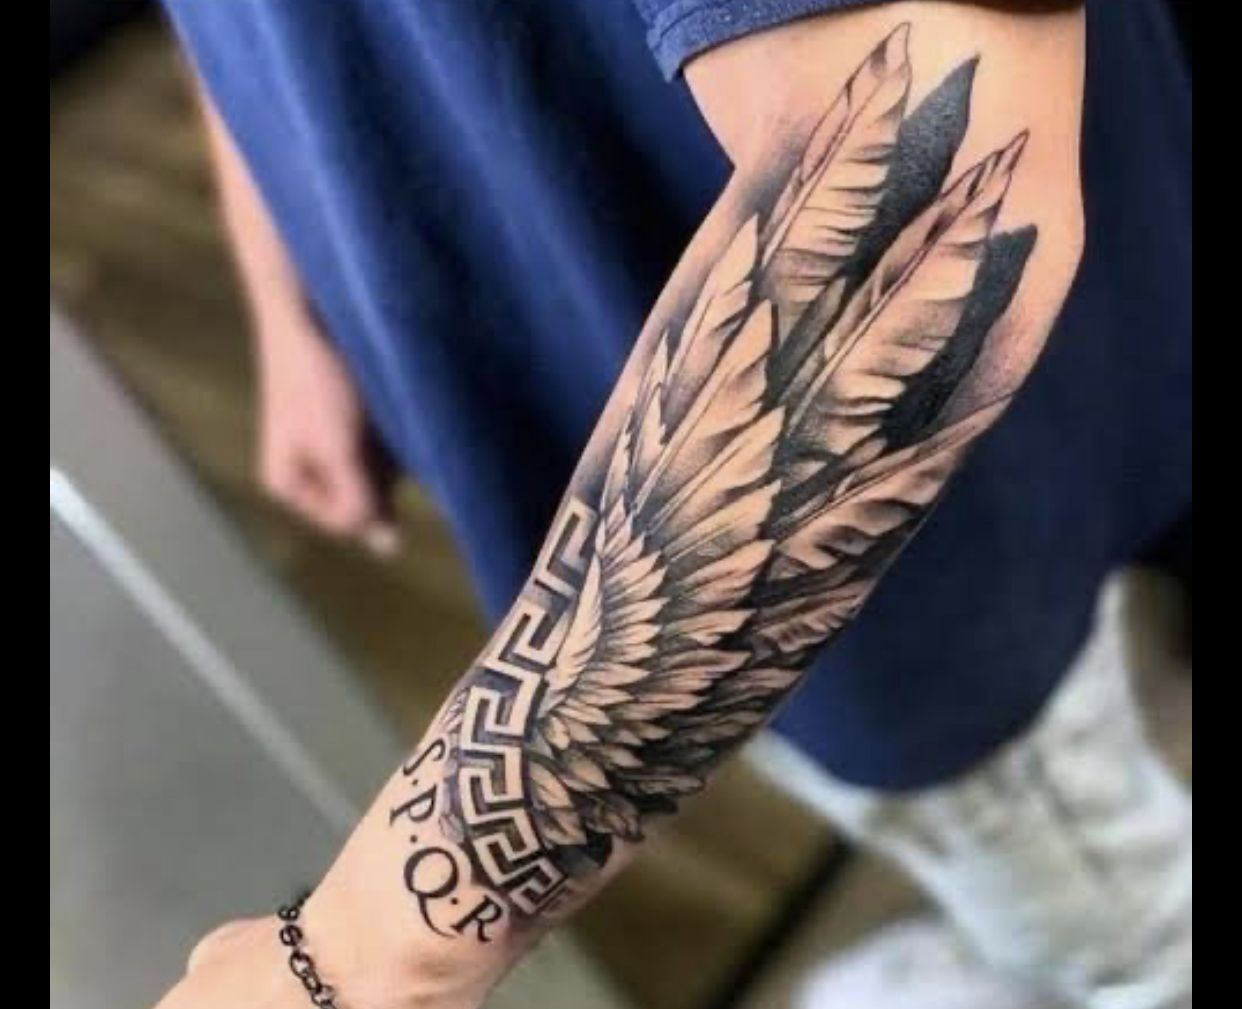 16 Coolest Forearm Tattoos For Men | Cool forearm tattoos ... | Cool  forearm tattoos, Forearm tattoos, Forearm tattoo men